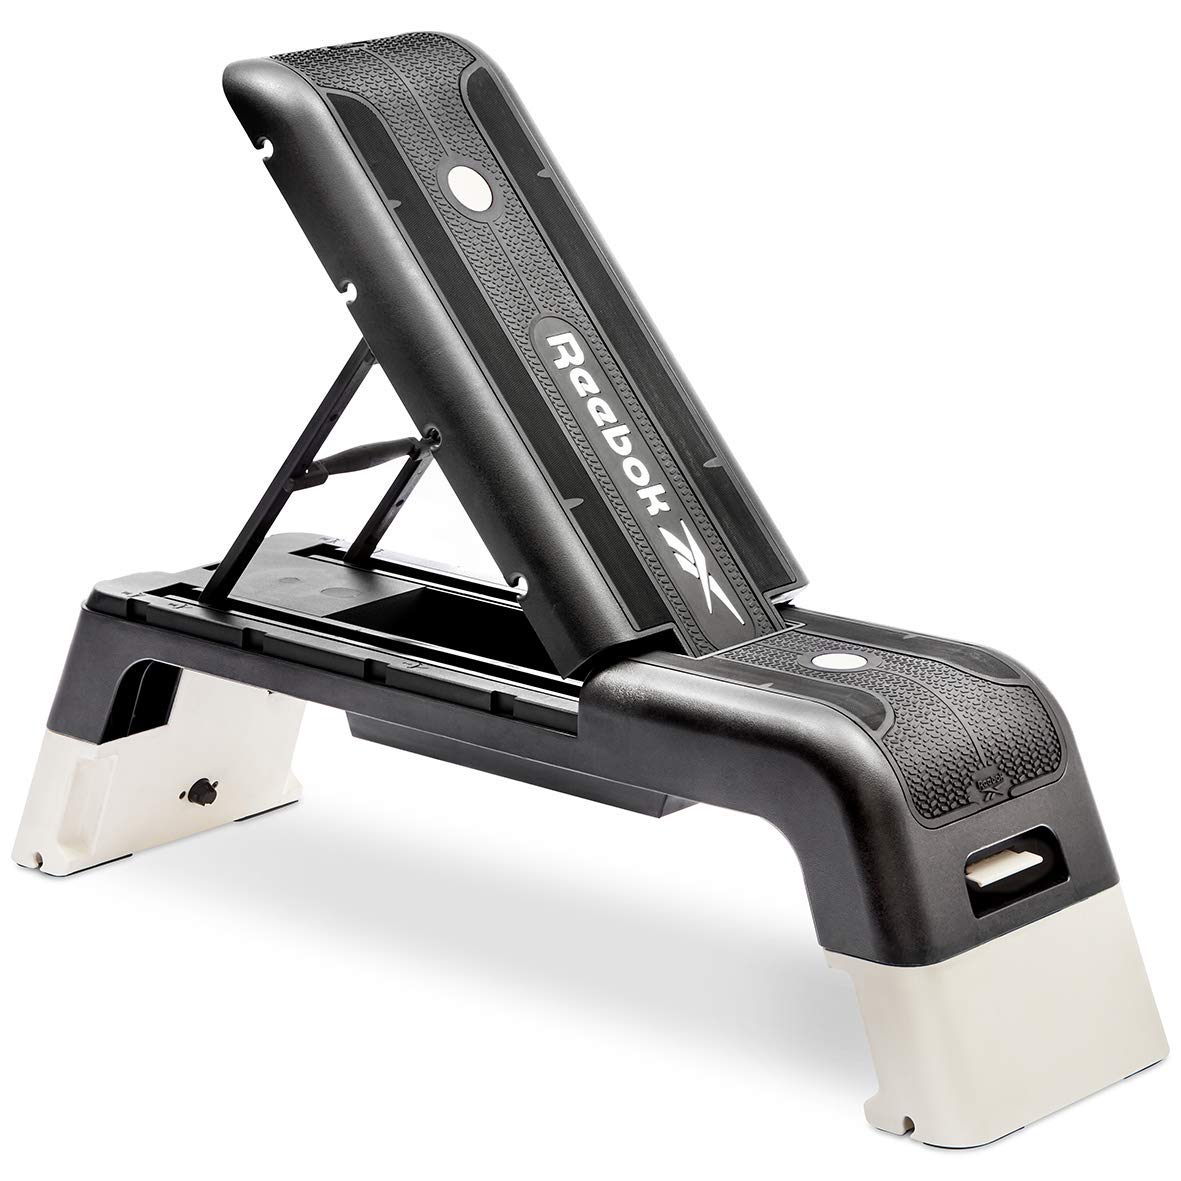 Reebok Fitness Multipurpose Adjustable Aerobic and Strength Training Workout Deck with Incline and Decline Bench Configurations,